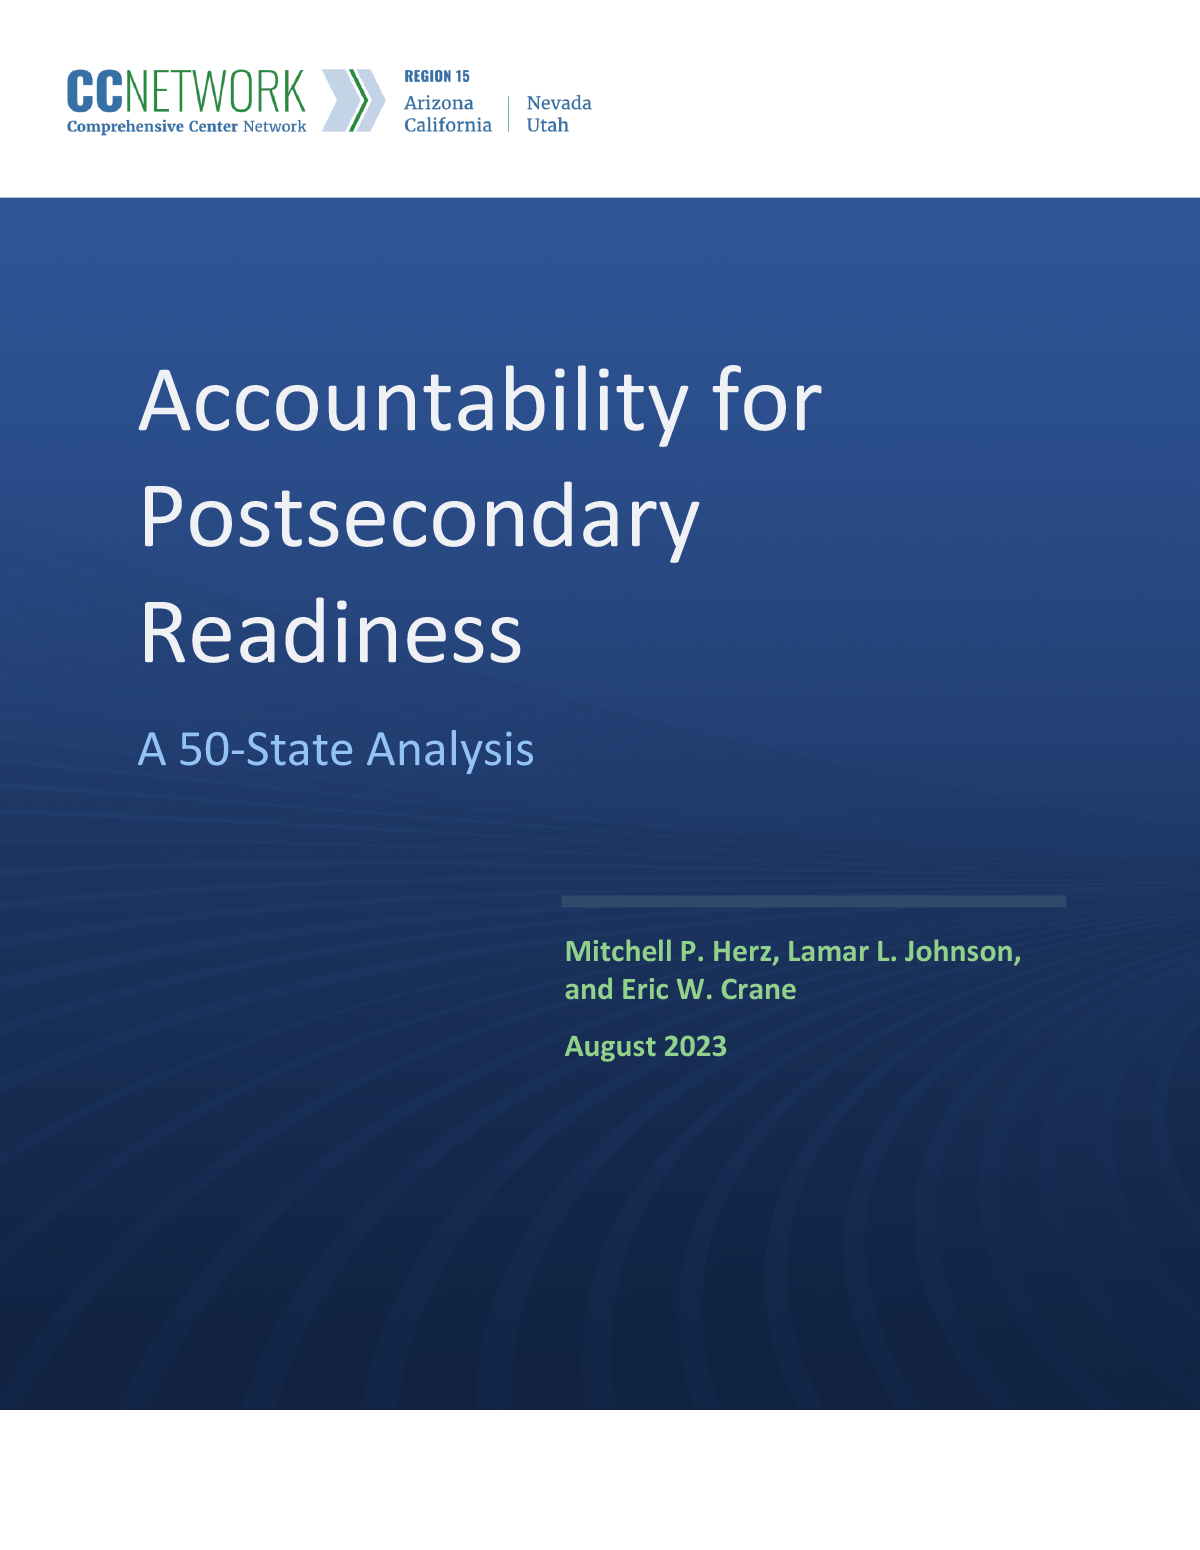 Accountability in Postsecondary Readiness